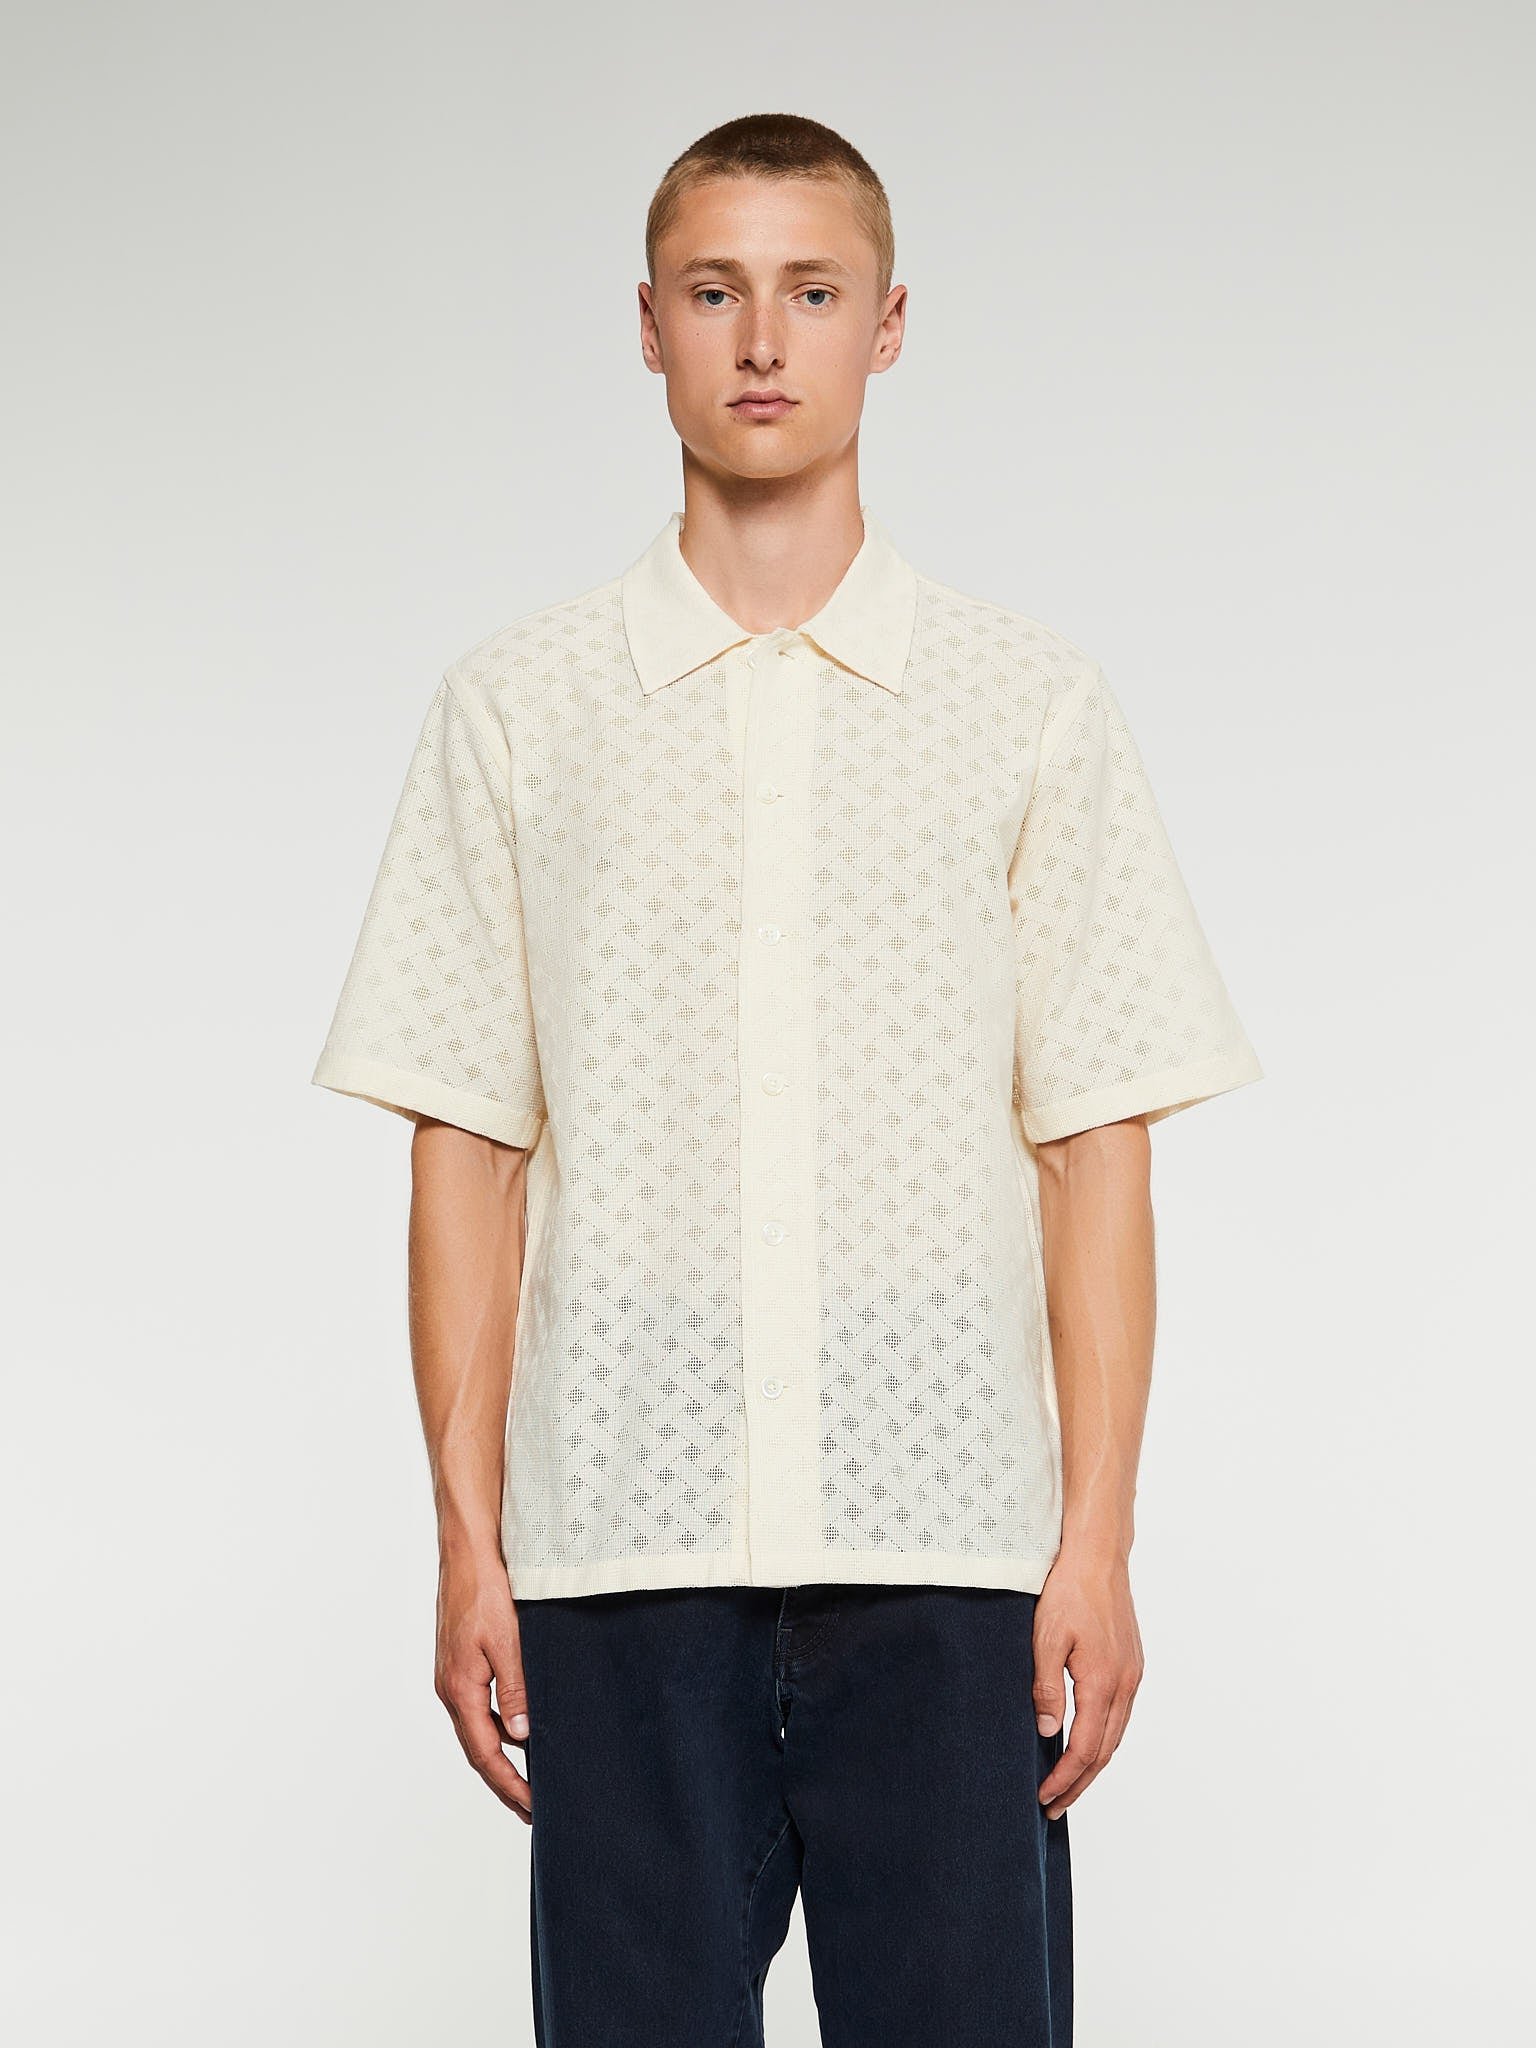 Spacey Shirt in Off White